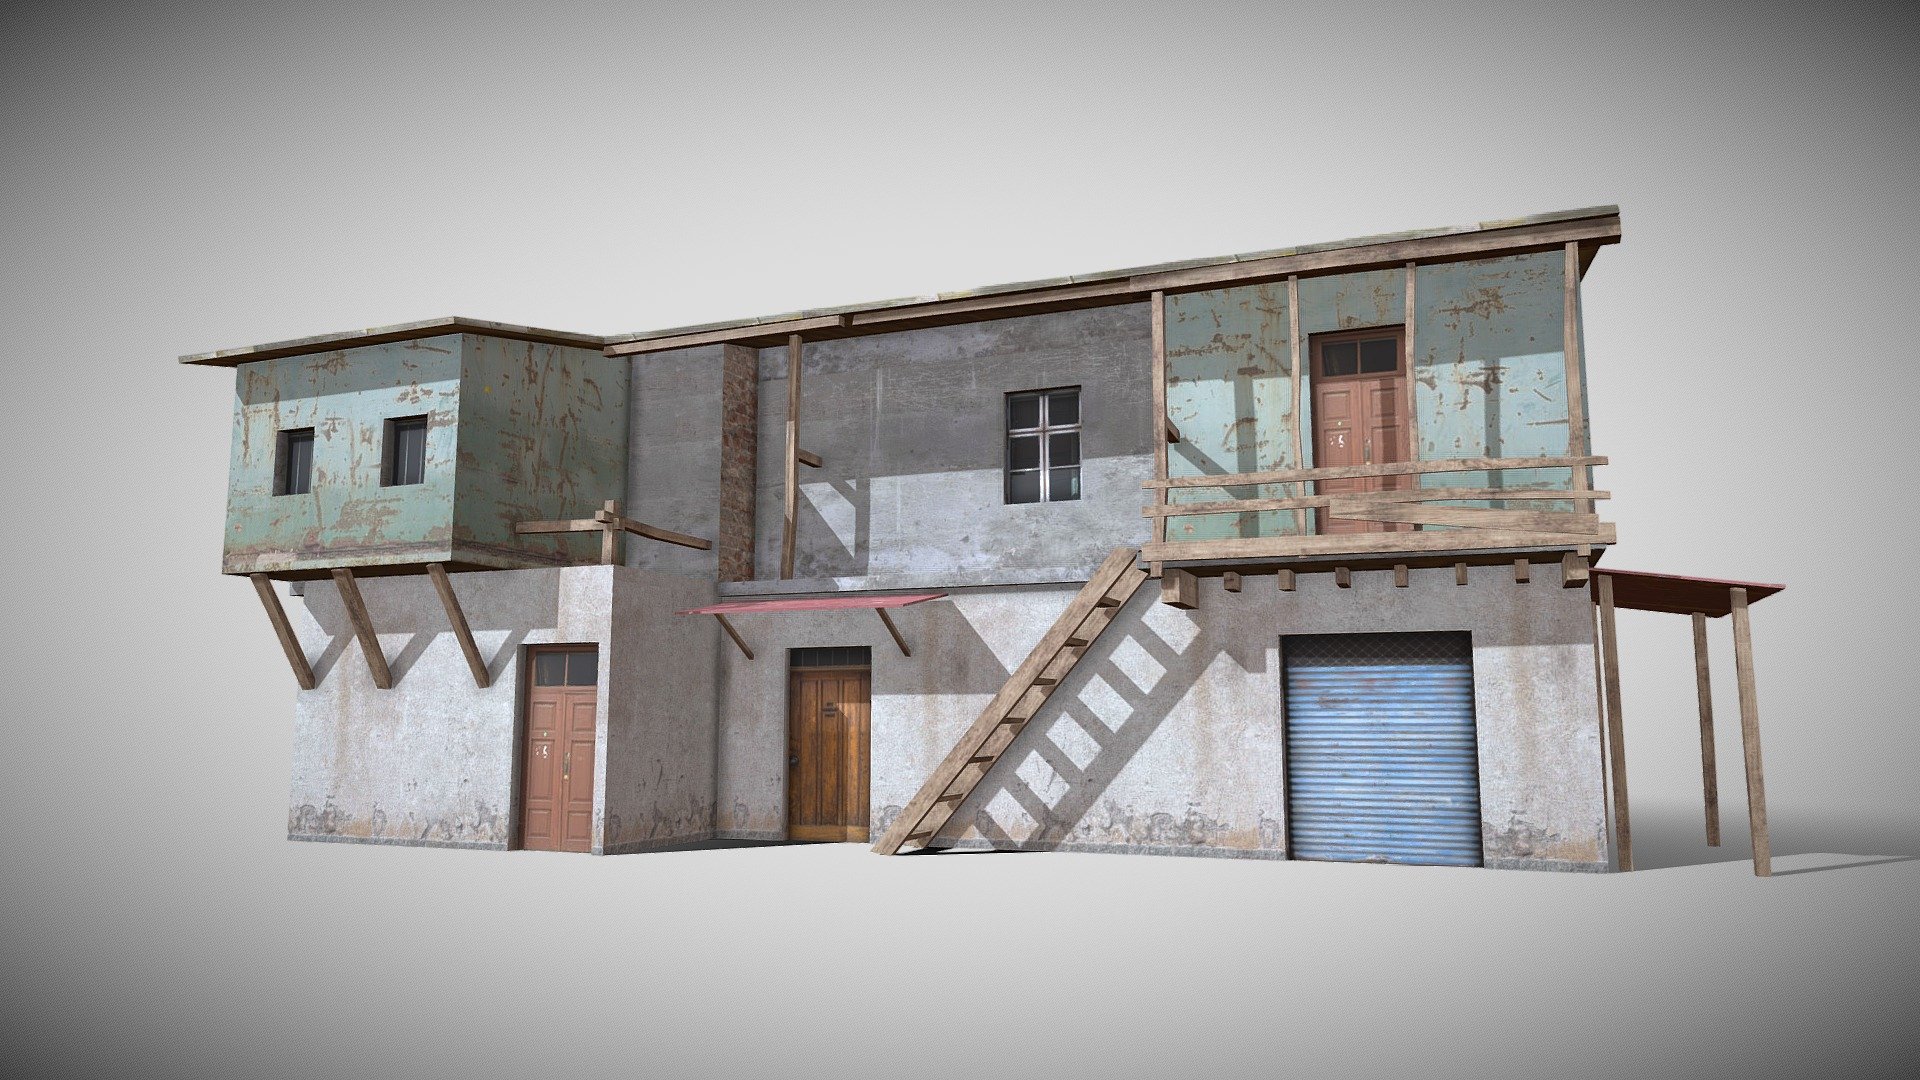 Game Ready 3D Old House /slum Native file format 3Ds max 2022 Other formats Blender 4.0 ,FBX, OBJ, All formats include materials &amp; textures

Polygons- 685   Vertices-803

Materials &amp; textures. 1 Diffuse Map 2048x2048 - Slum X10 - Buy Royalty Free 3D model by 3DRK (@3DRK98) 3d model